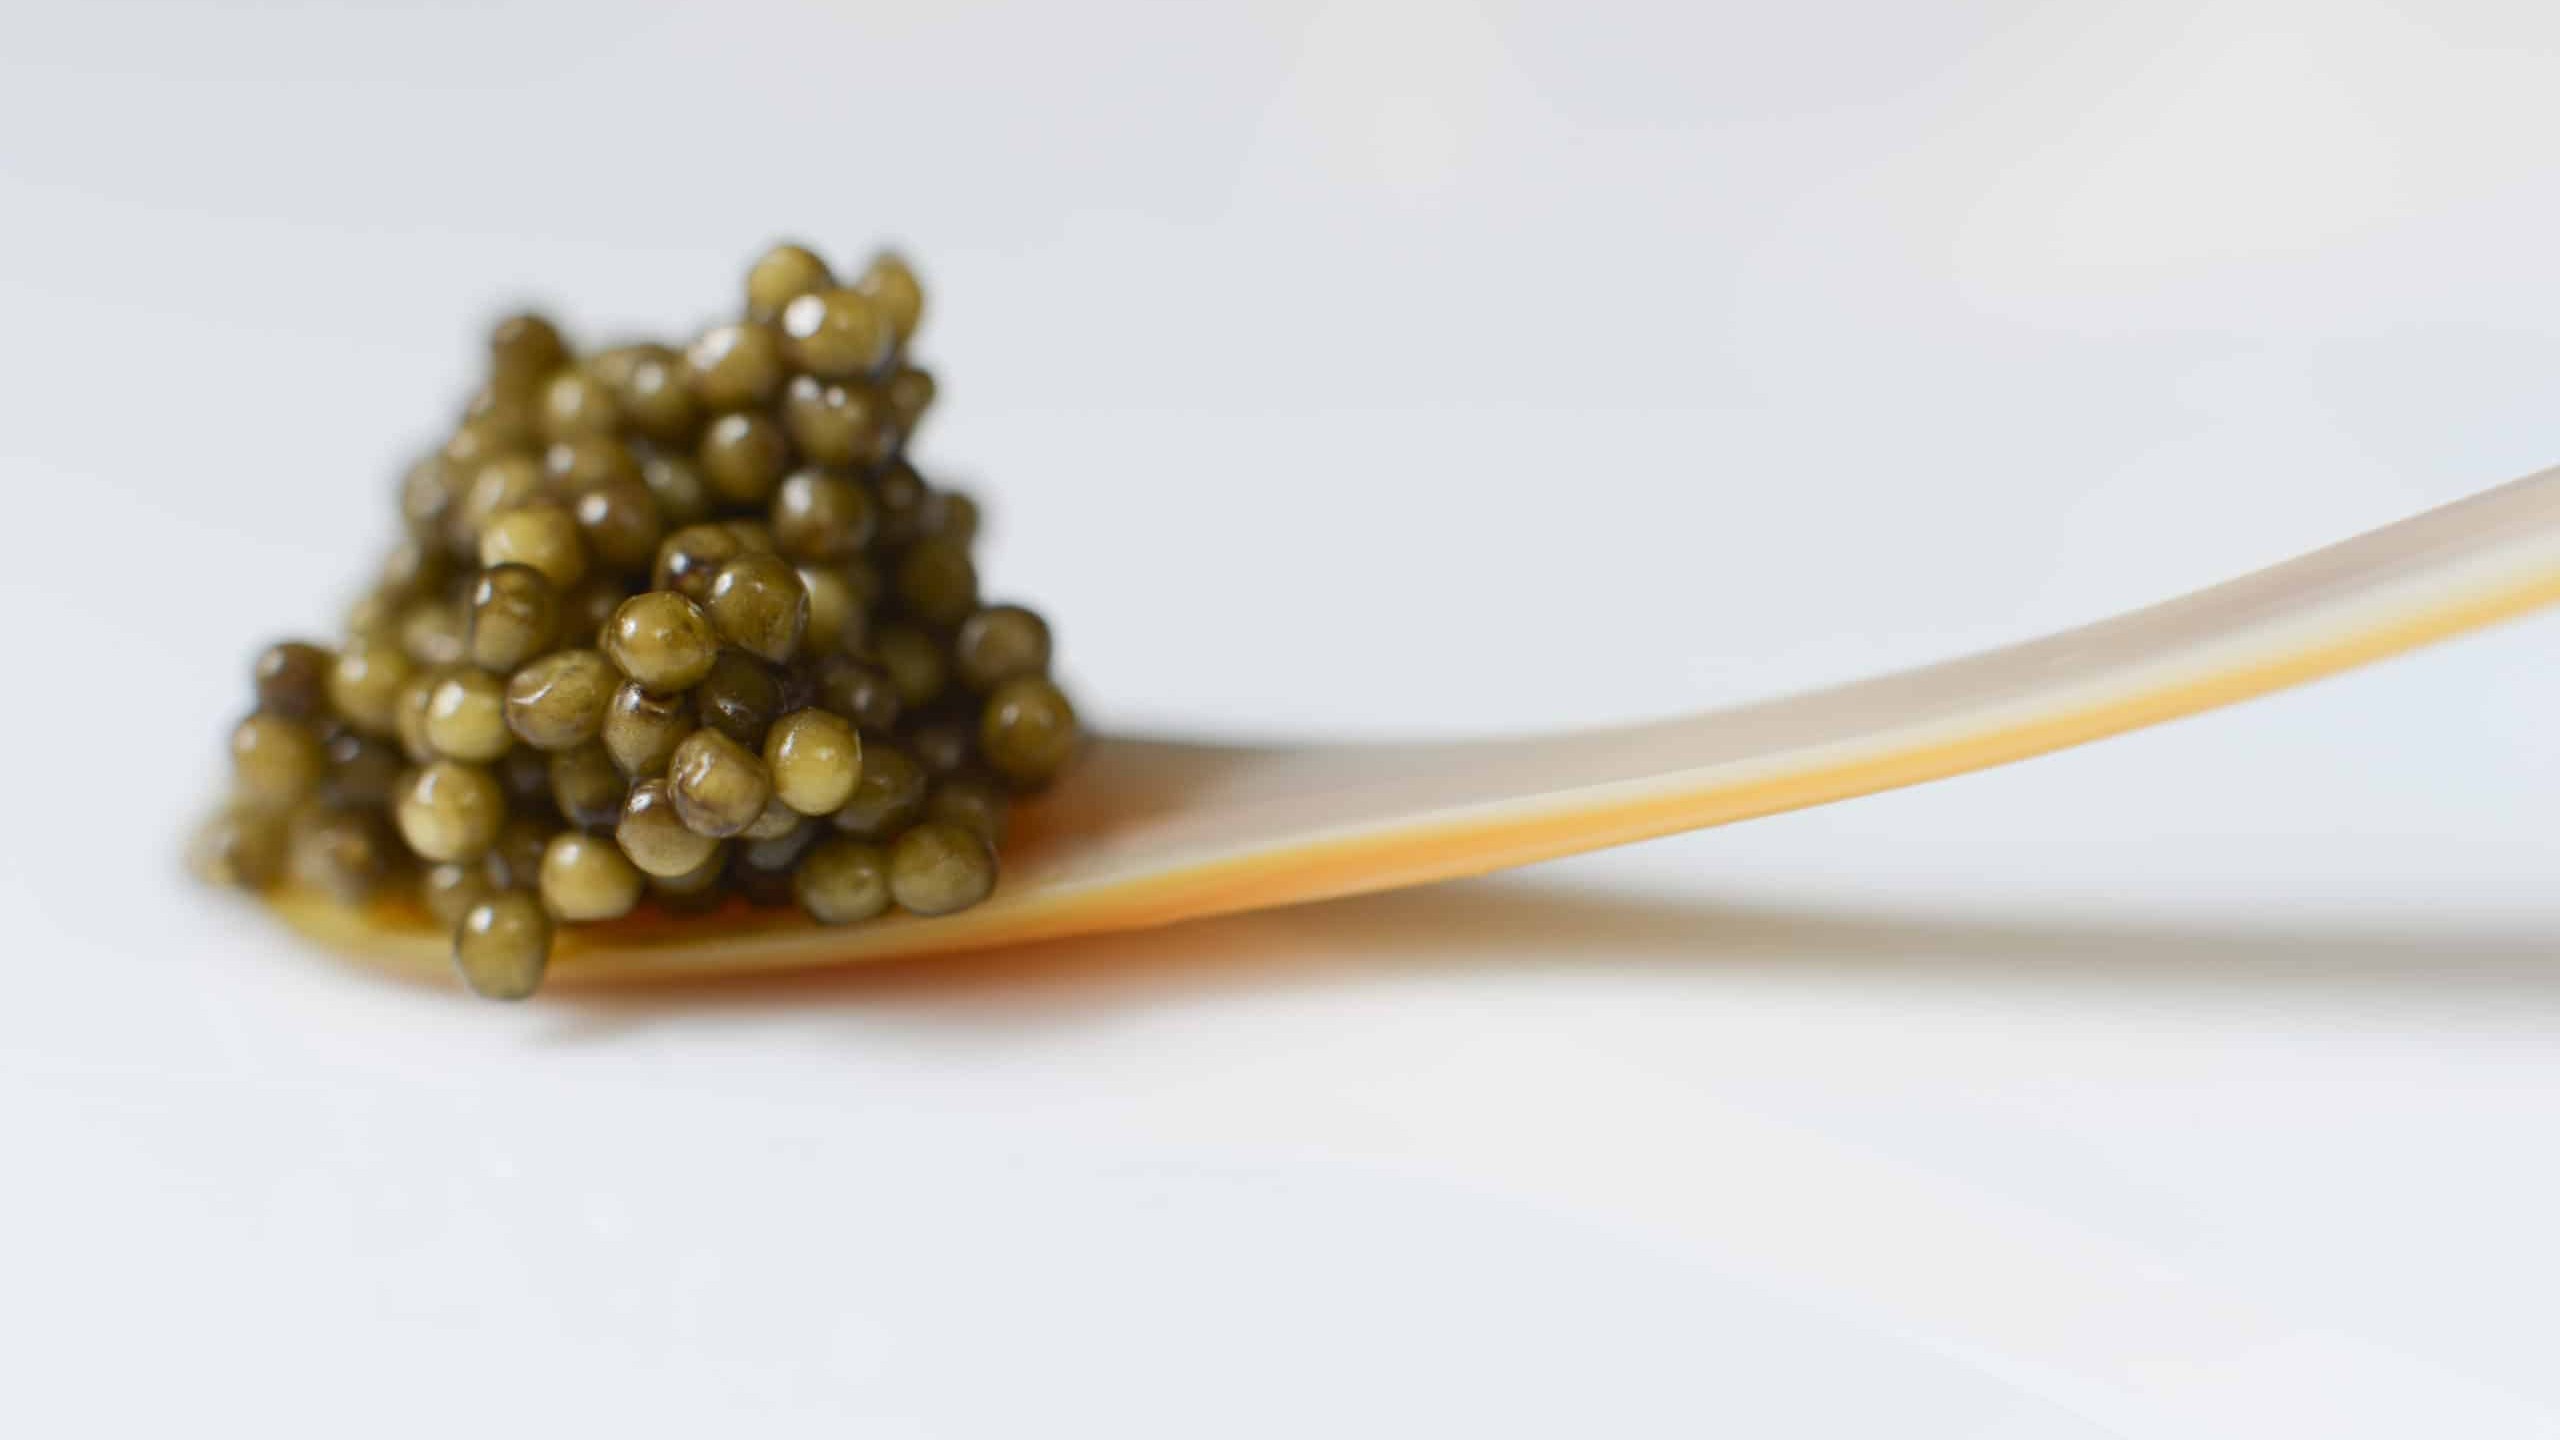 The best caviar grade from Sterling Caviar, Imperial Caviar, on a mother of pearl spoon